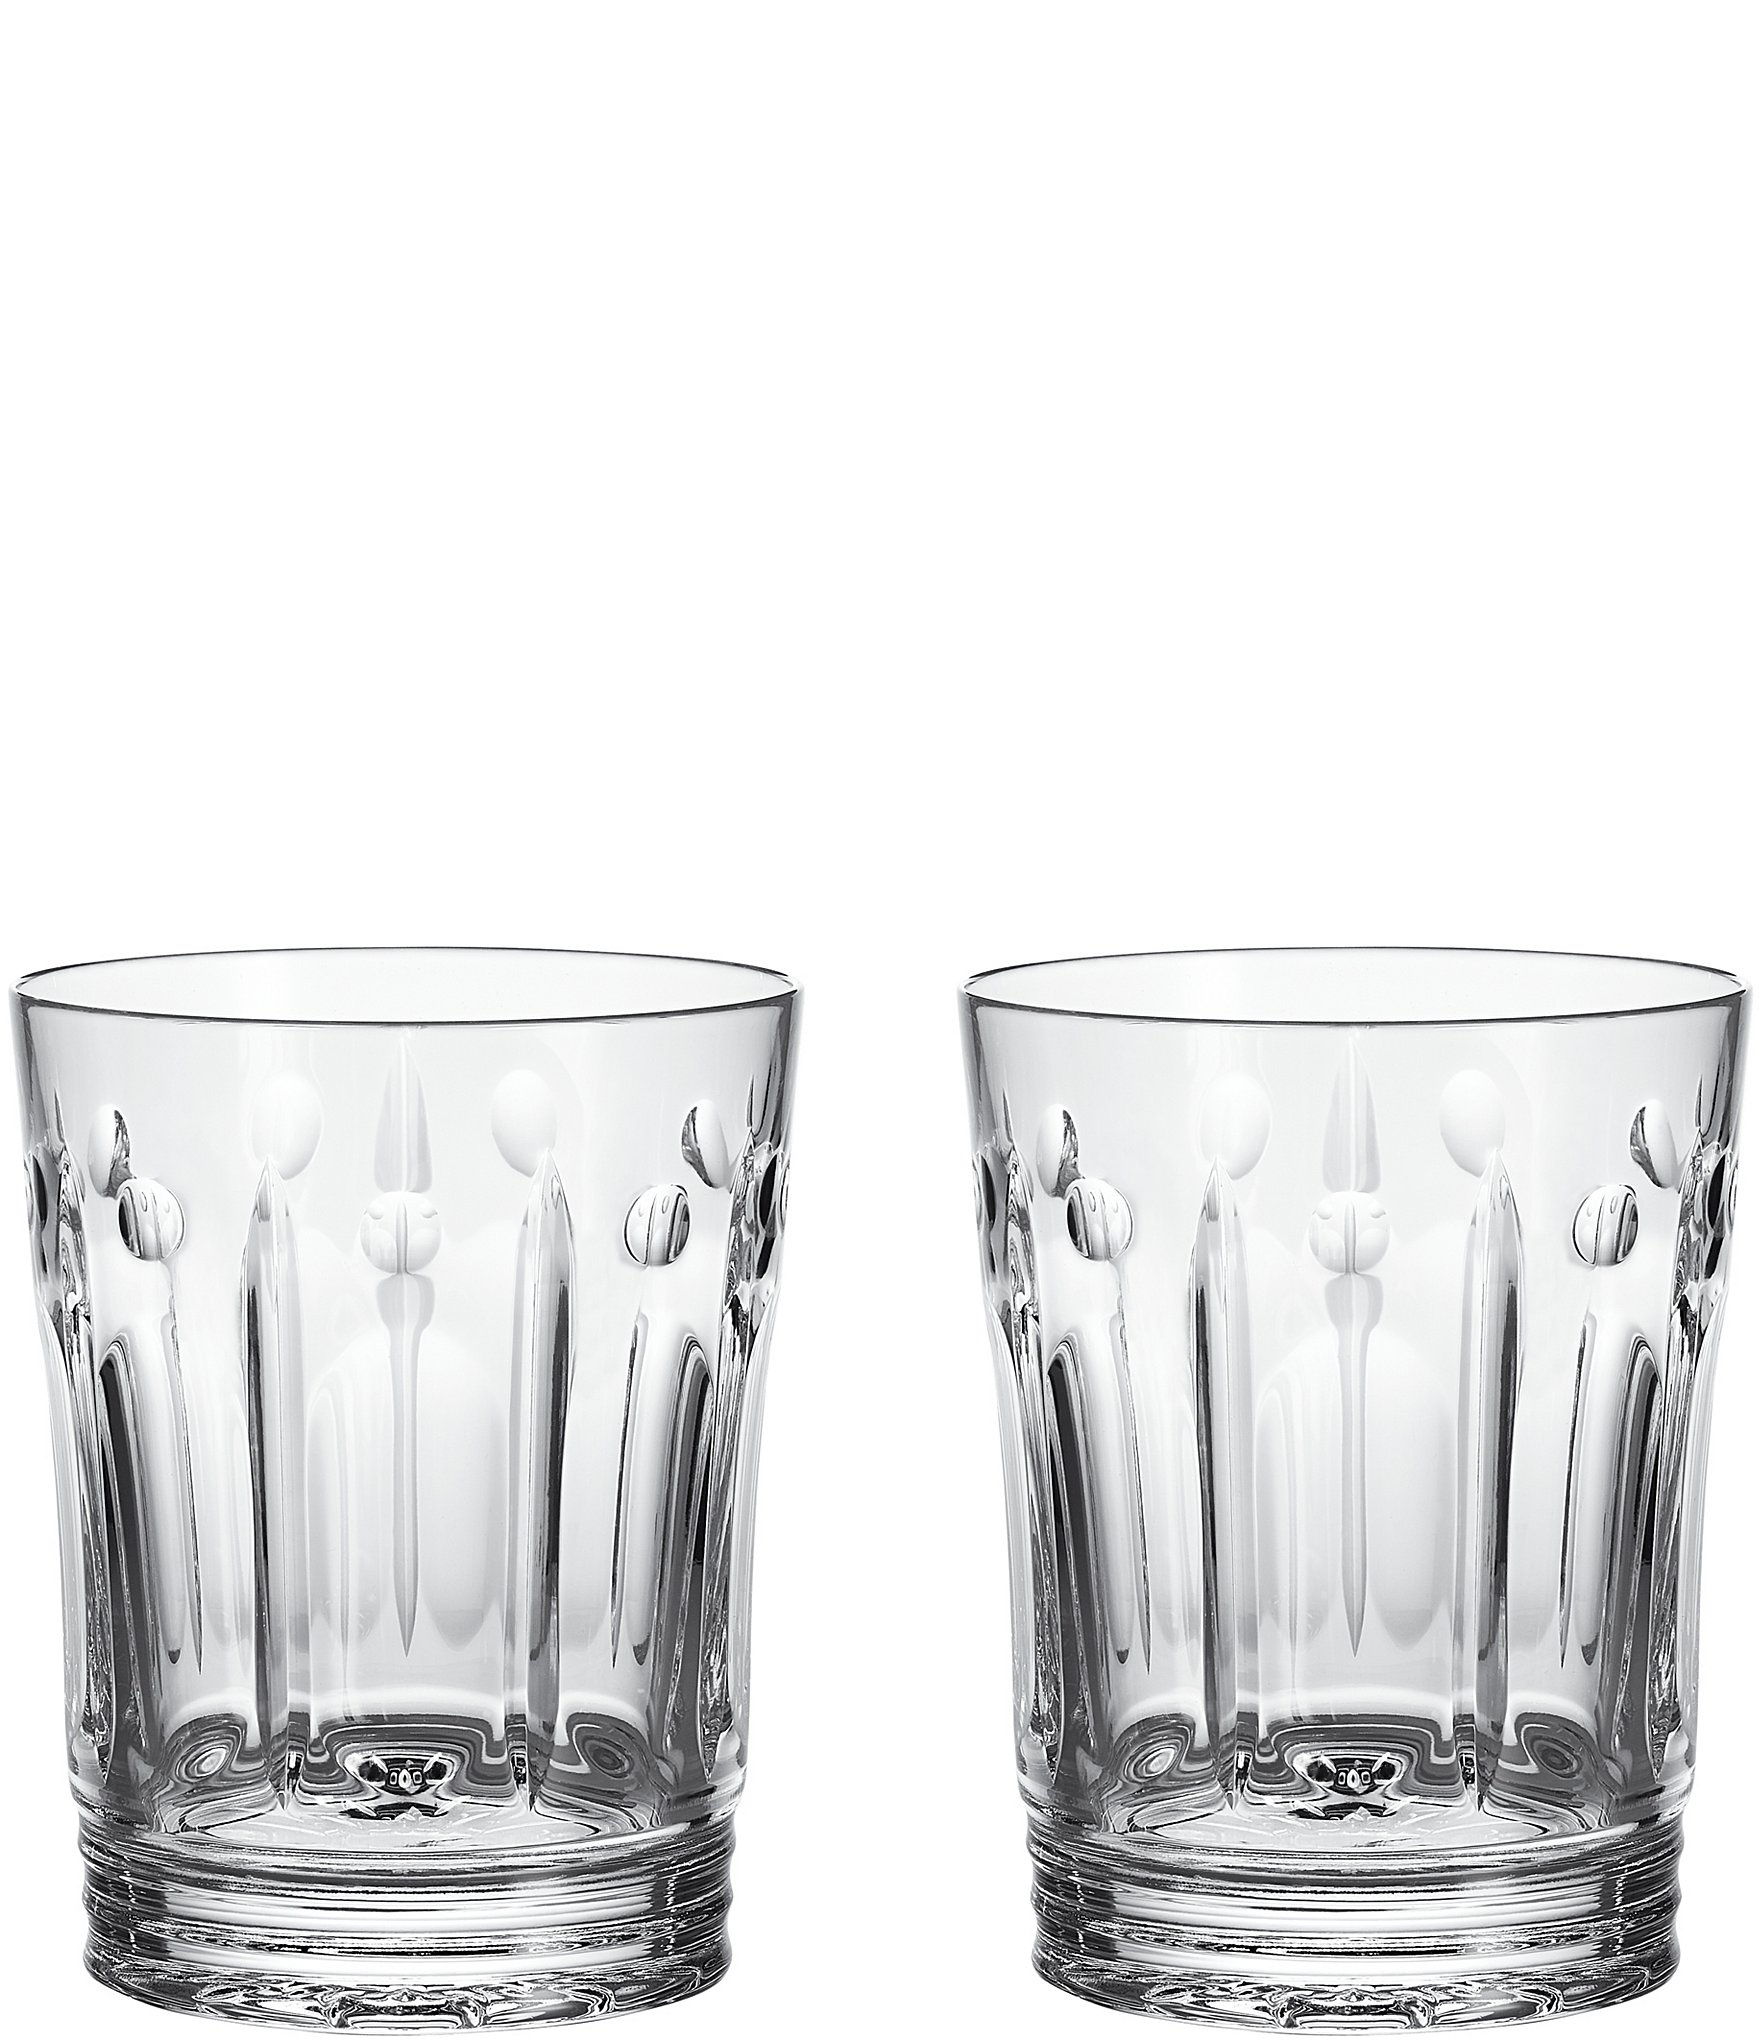 https://dimg.dillards.com/is/image/DillardsZoom/zoom/waterford-crystal-winter-wonders-clear-rose-double-old-fashion-glasses-set-of-2/00000000_zi_20273994.jpg